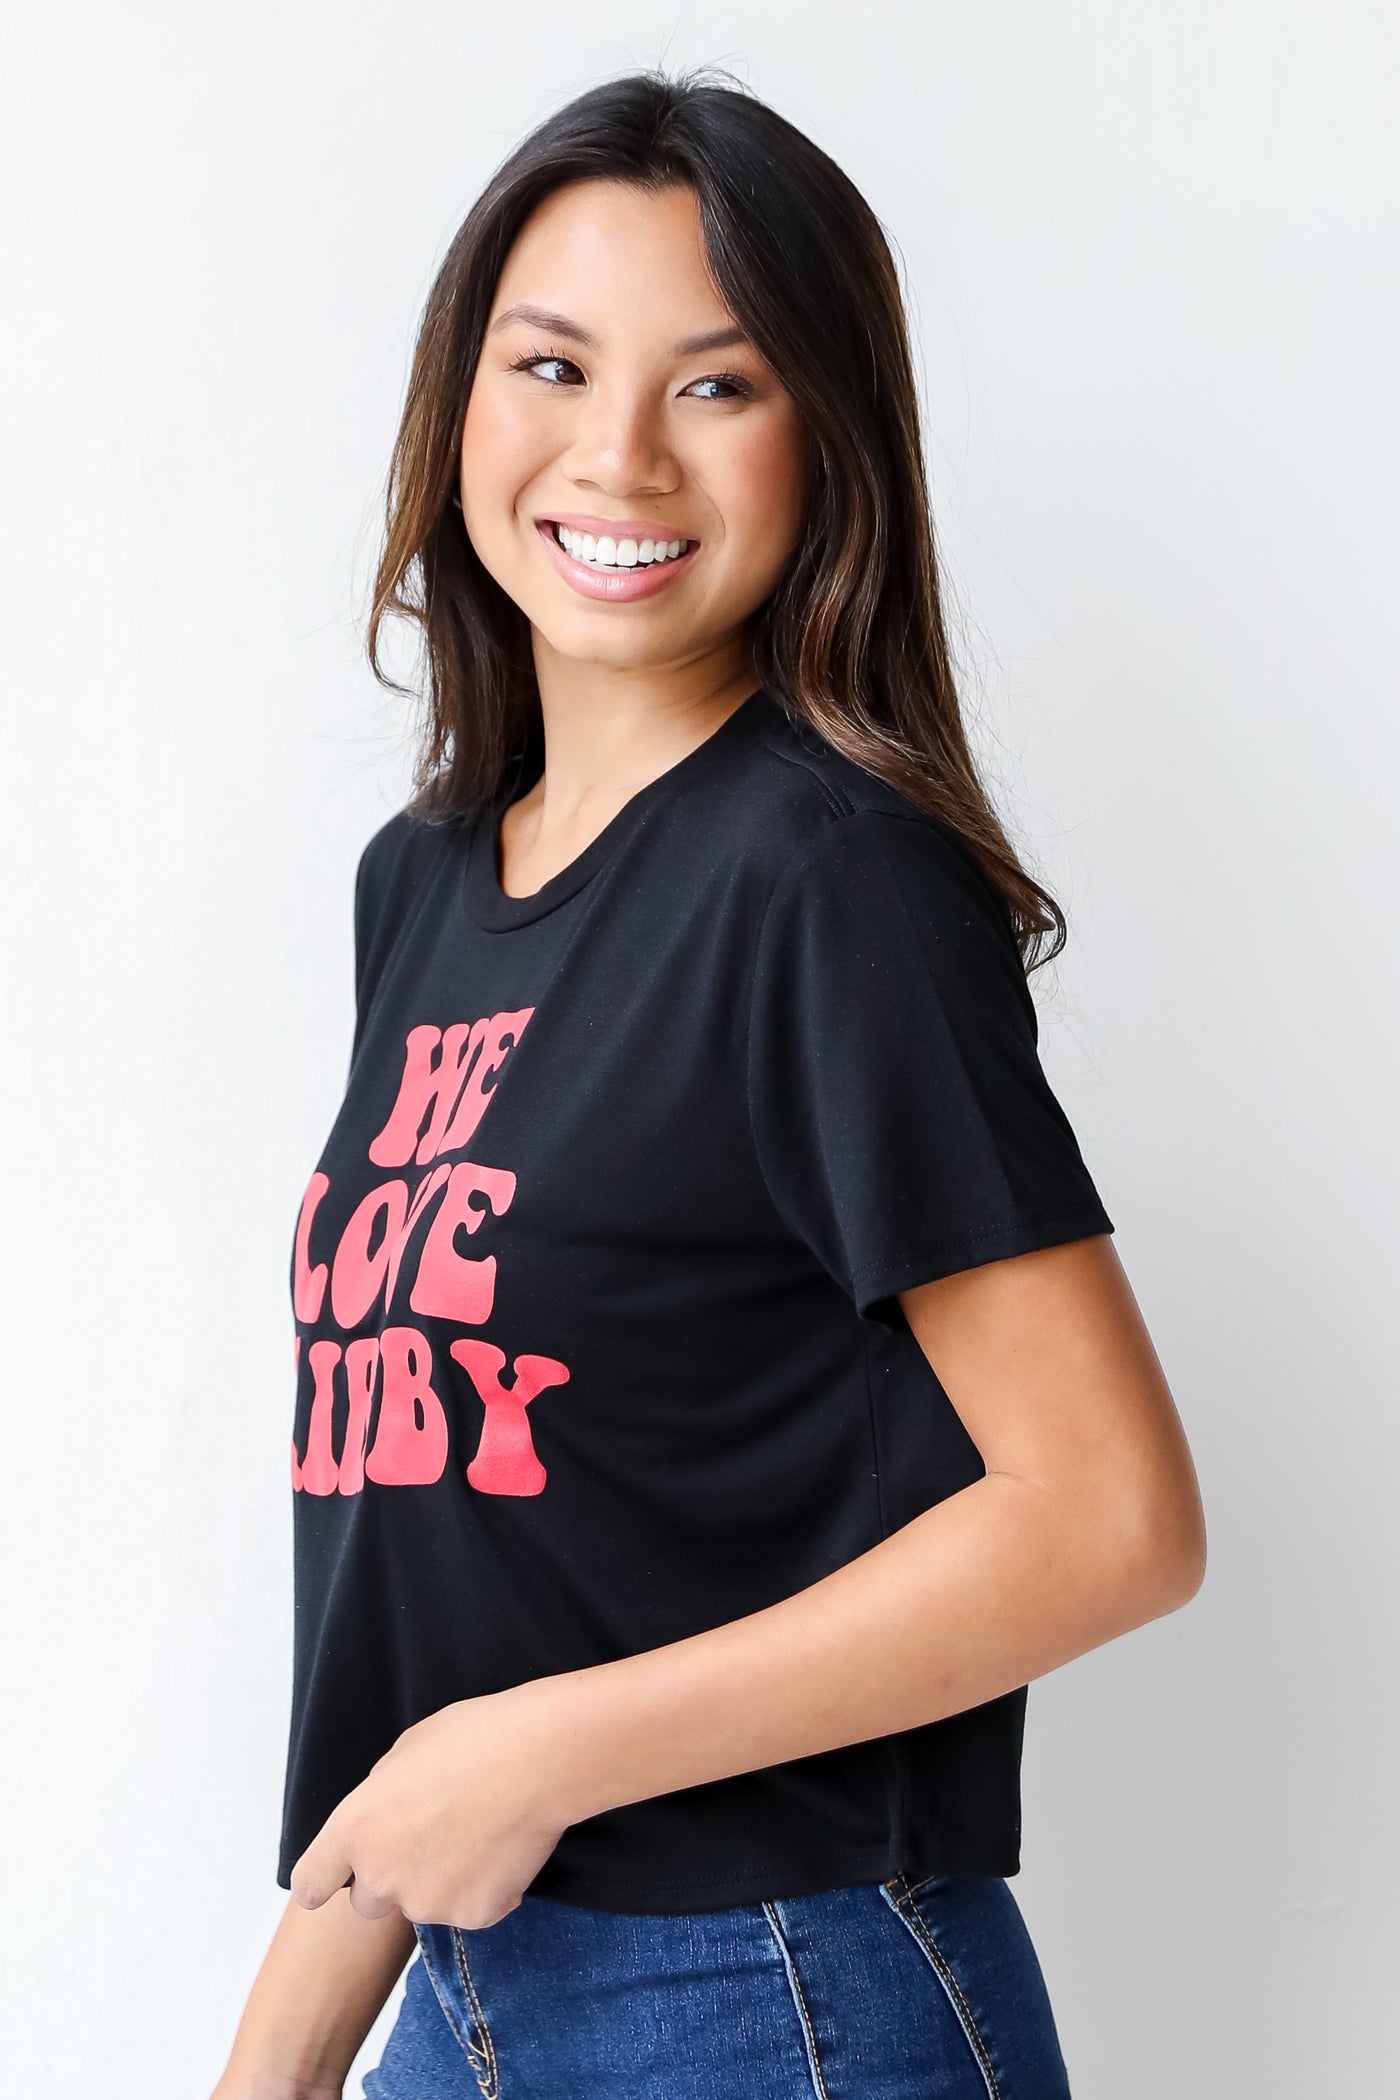 We Love Kirby Cropped Tee side view